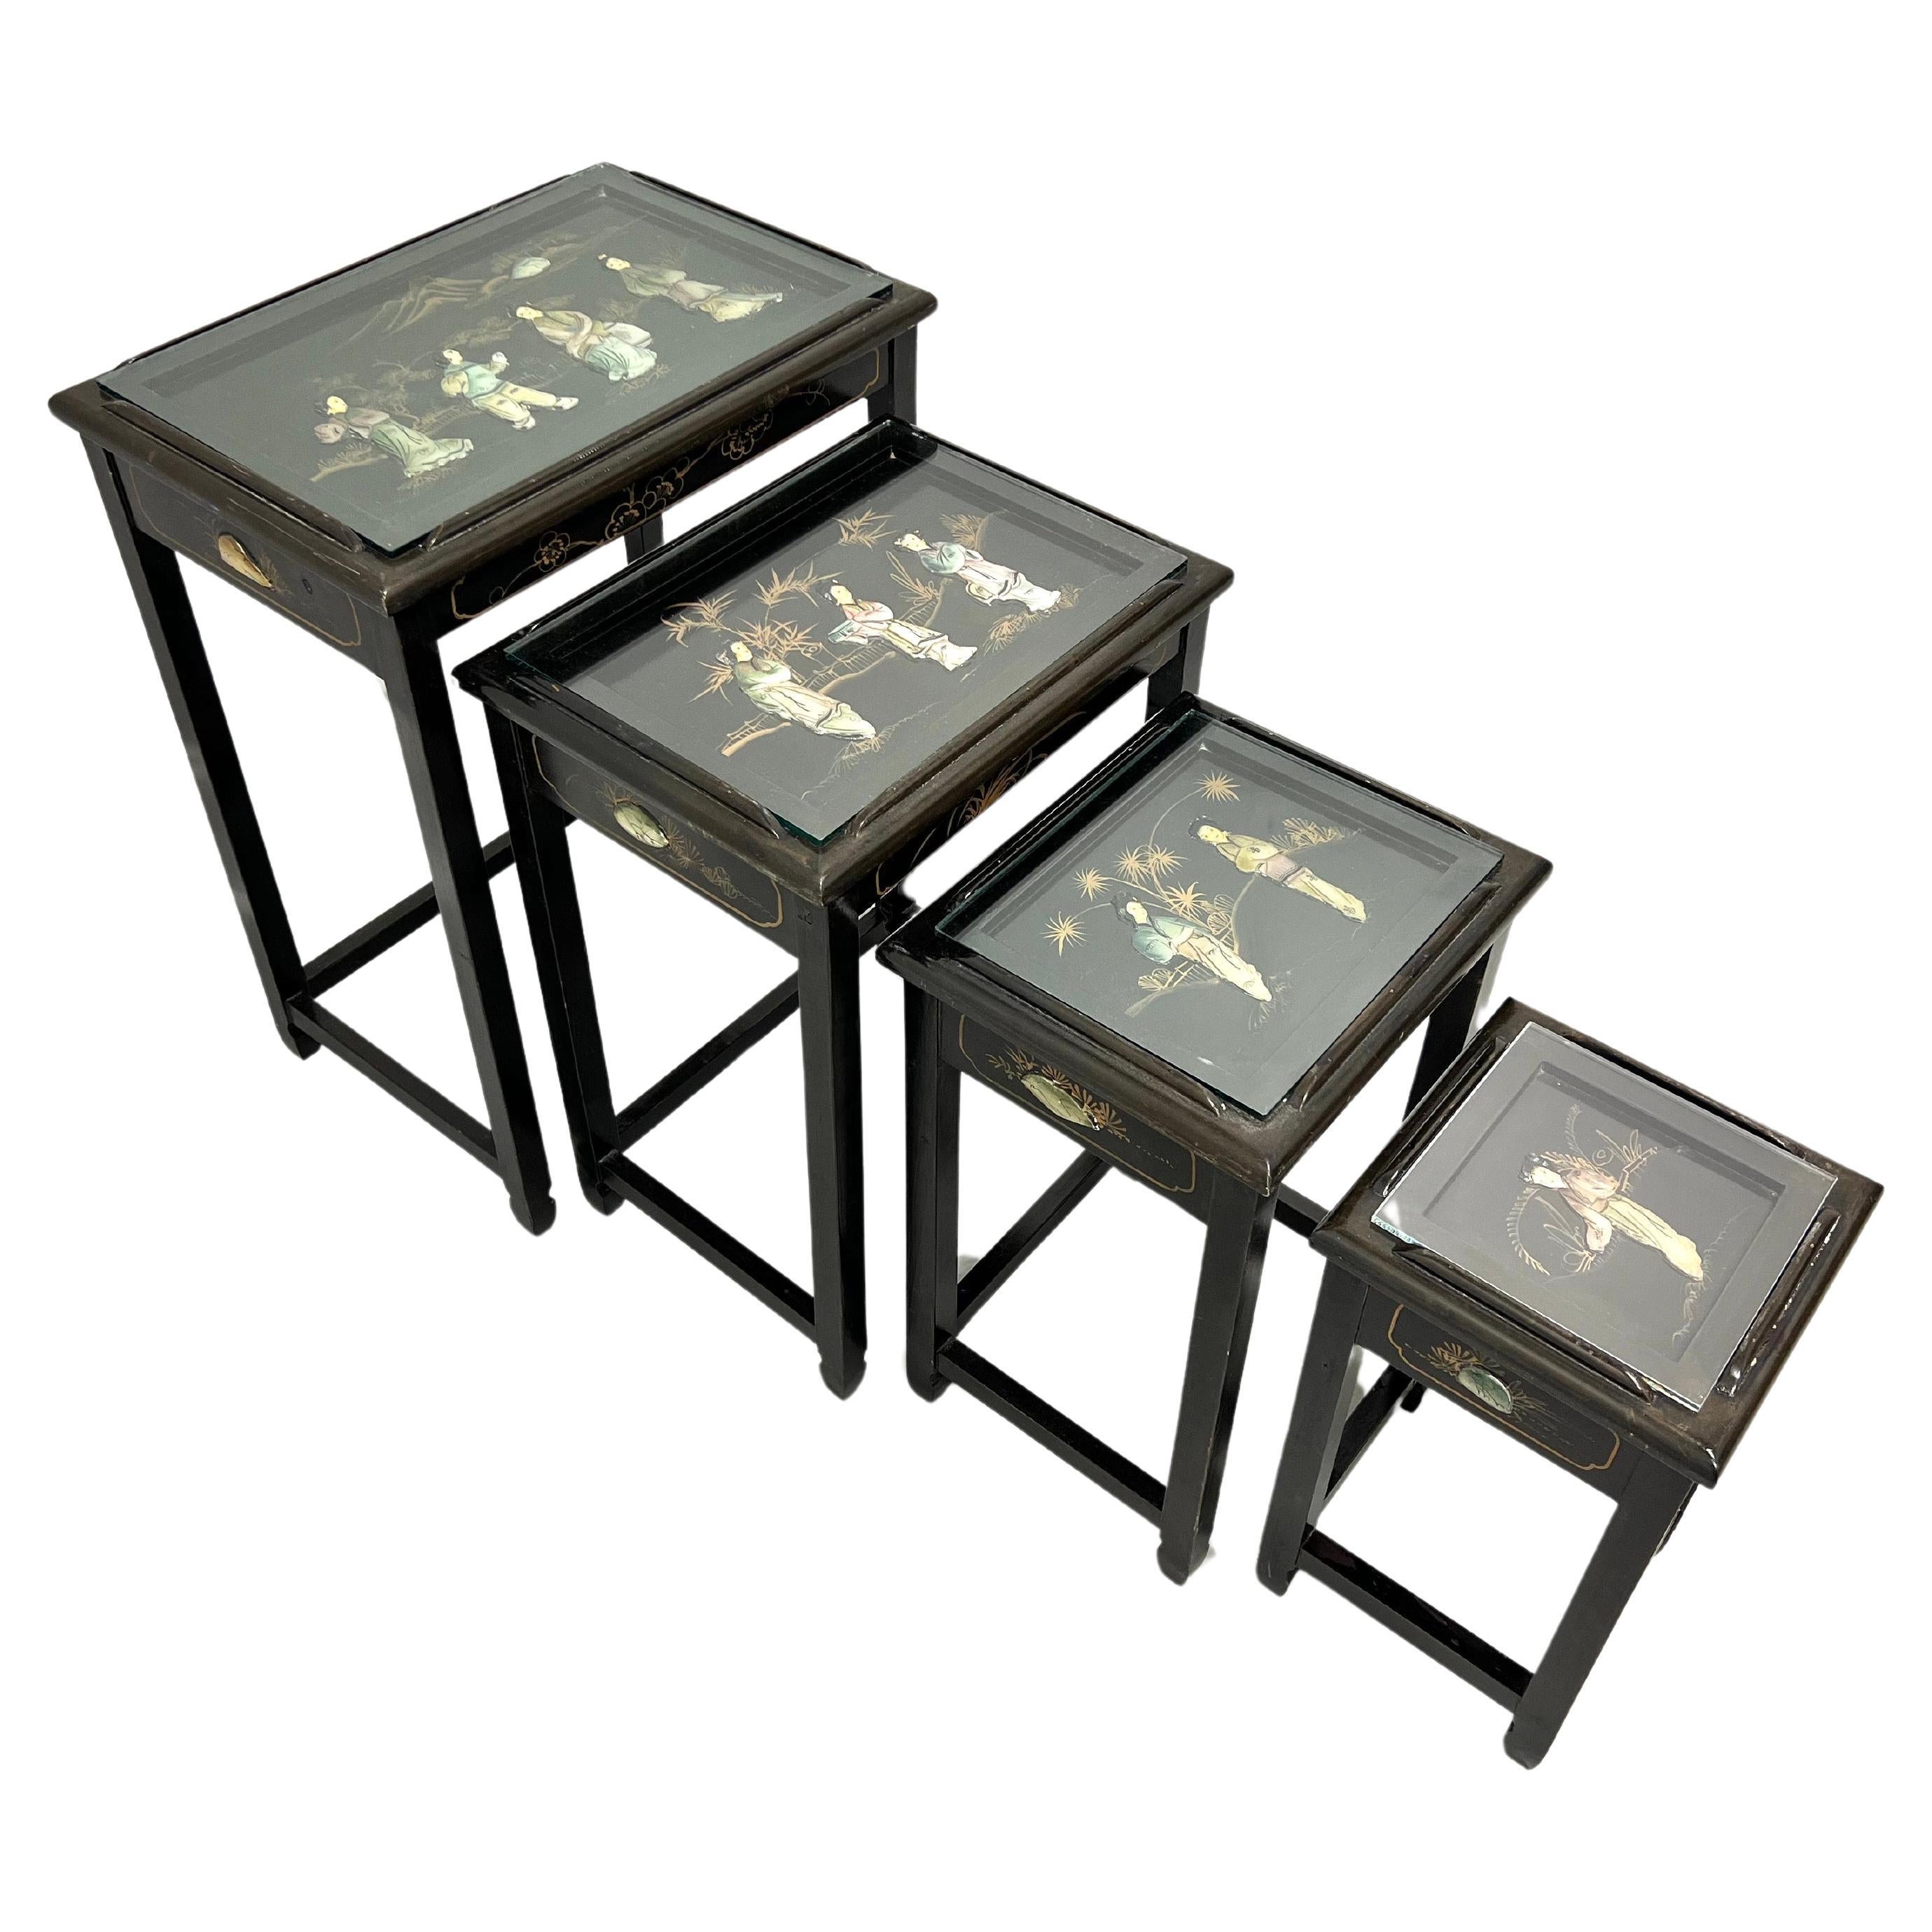 1980's Chinese Export Black Lacquer Hand Painted Nesting Tables - Set of 4 For Sale